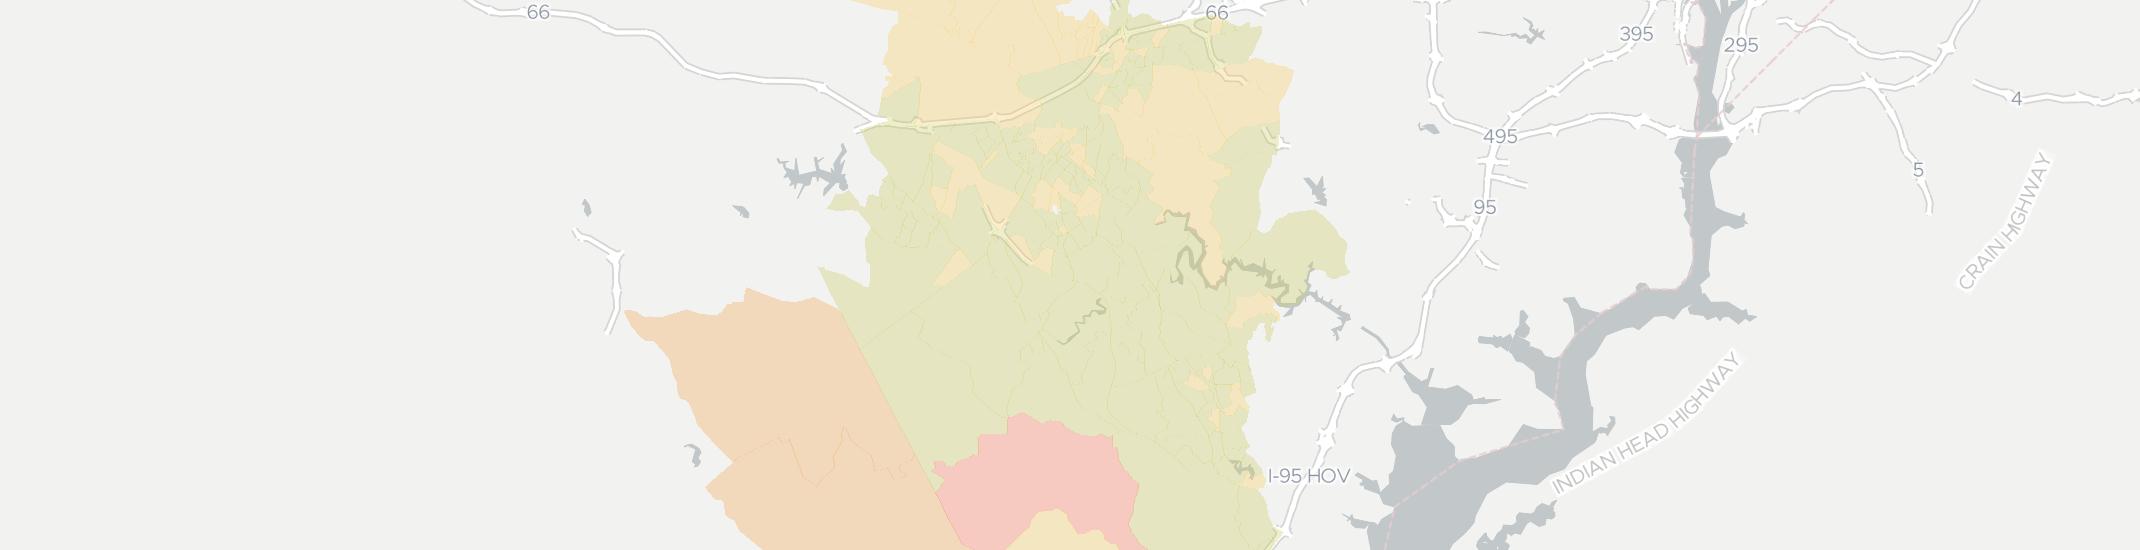 Manassas Internet Competition Map. Click for interactive map.